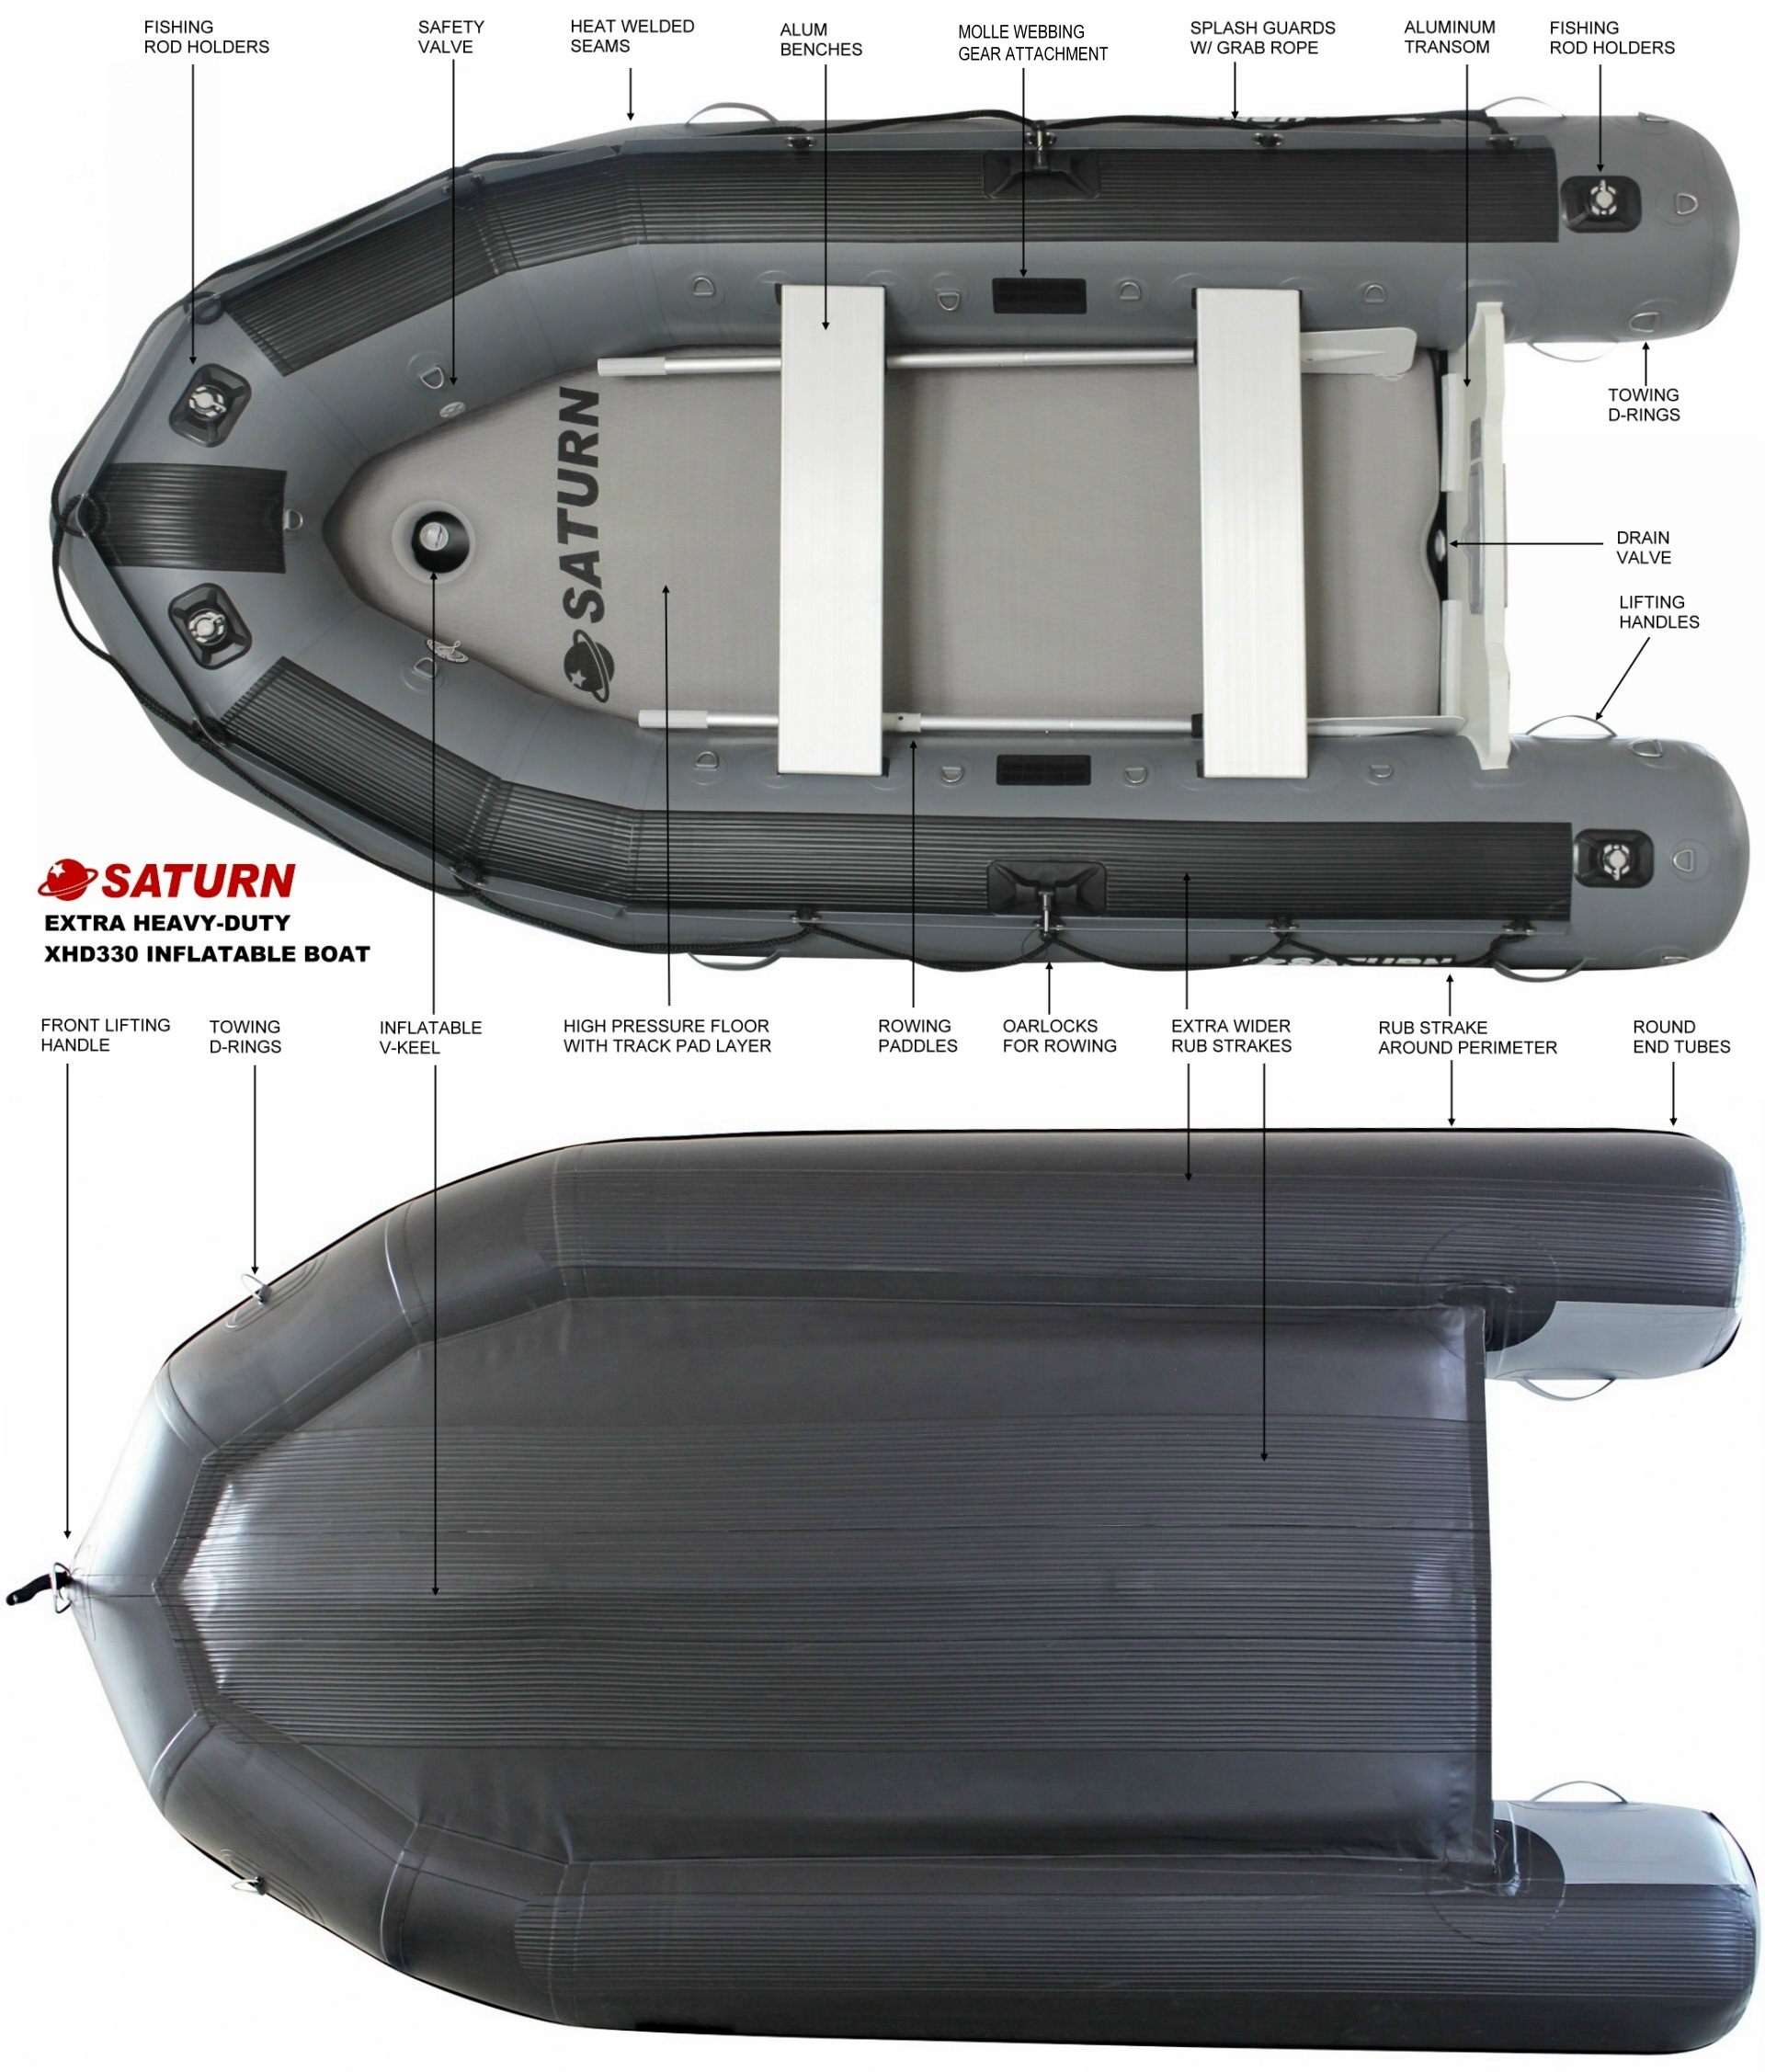 Saturn XHD330 inflatable boat specs